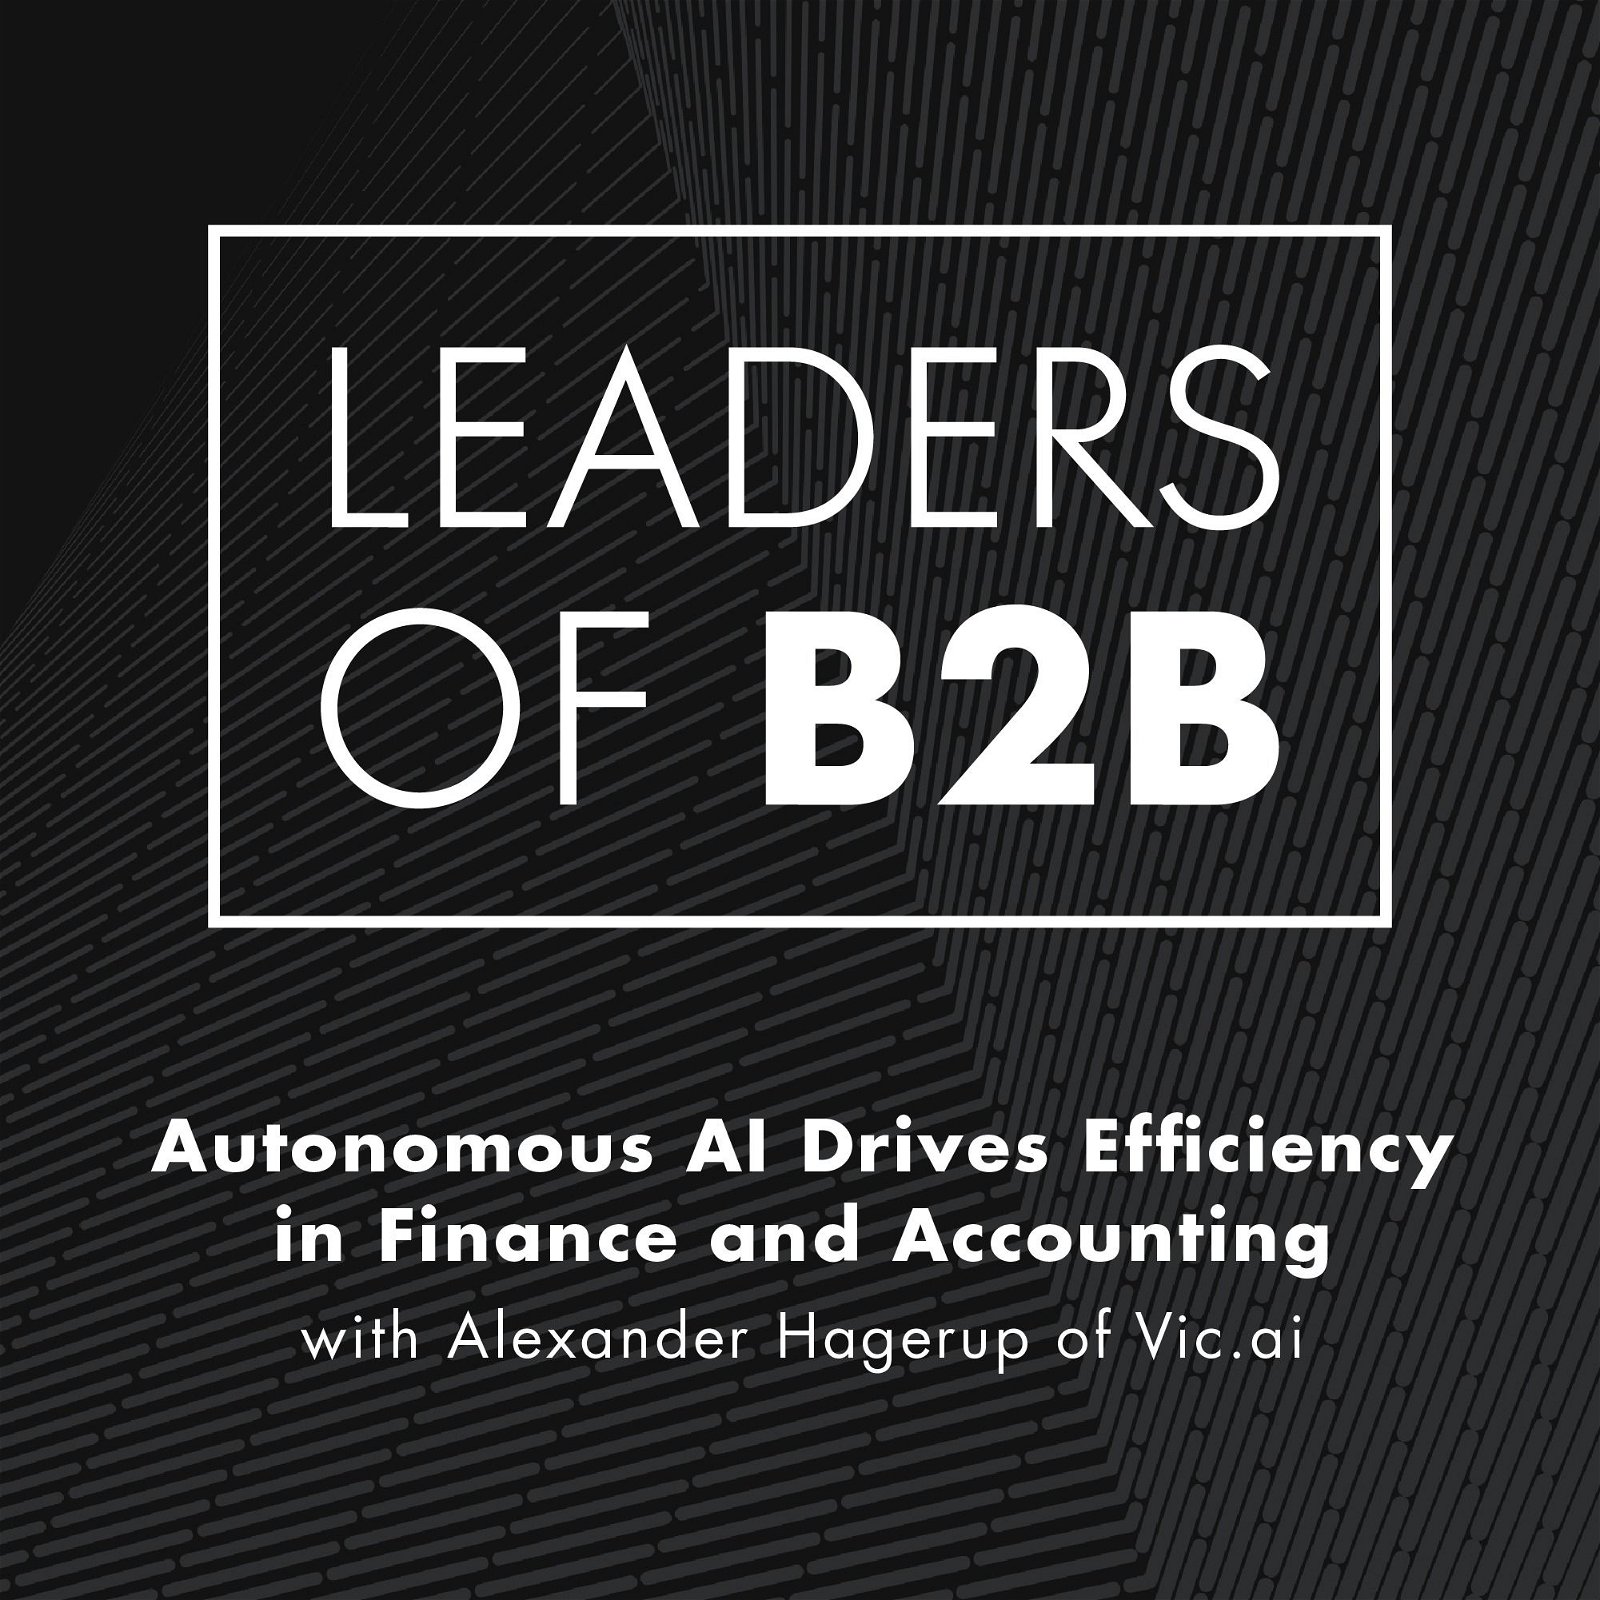 Autonomous AI Drives Efficiency in Finance and Accounting with Alexander Hagerup of Vic.ai